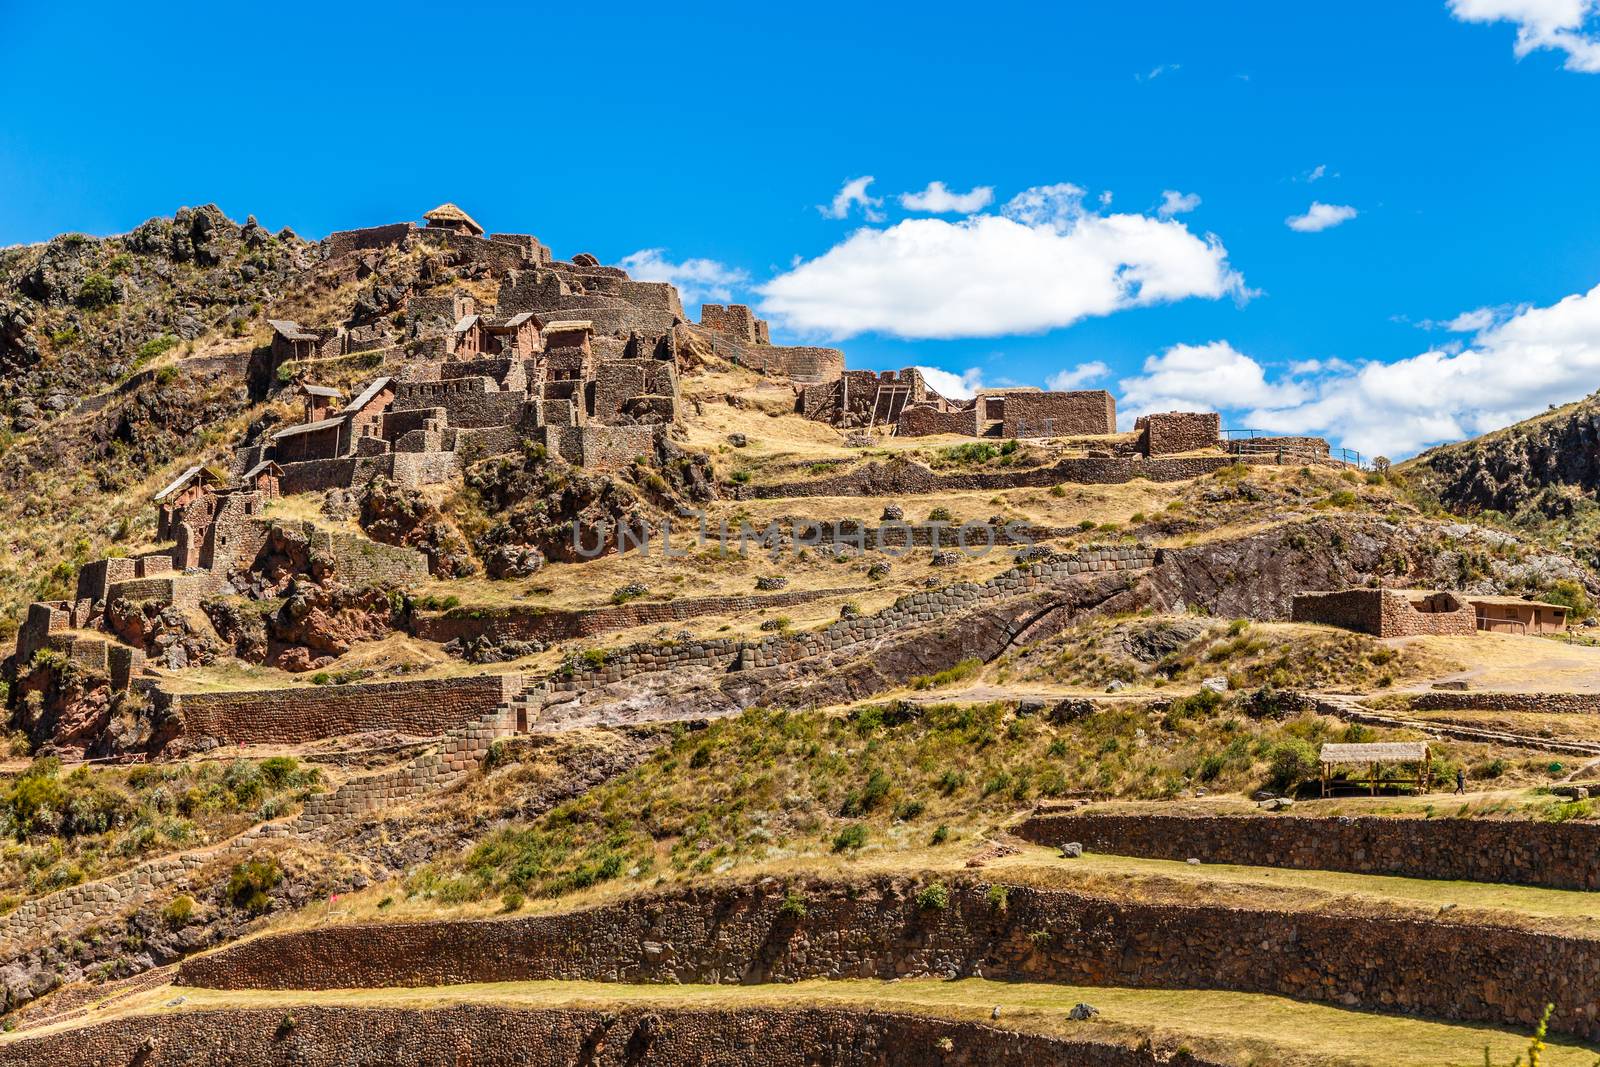 Ruins of ancient Incan citadel  with terraces on the mountain, Pisac, Peru